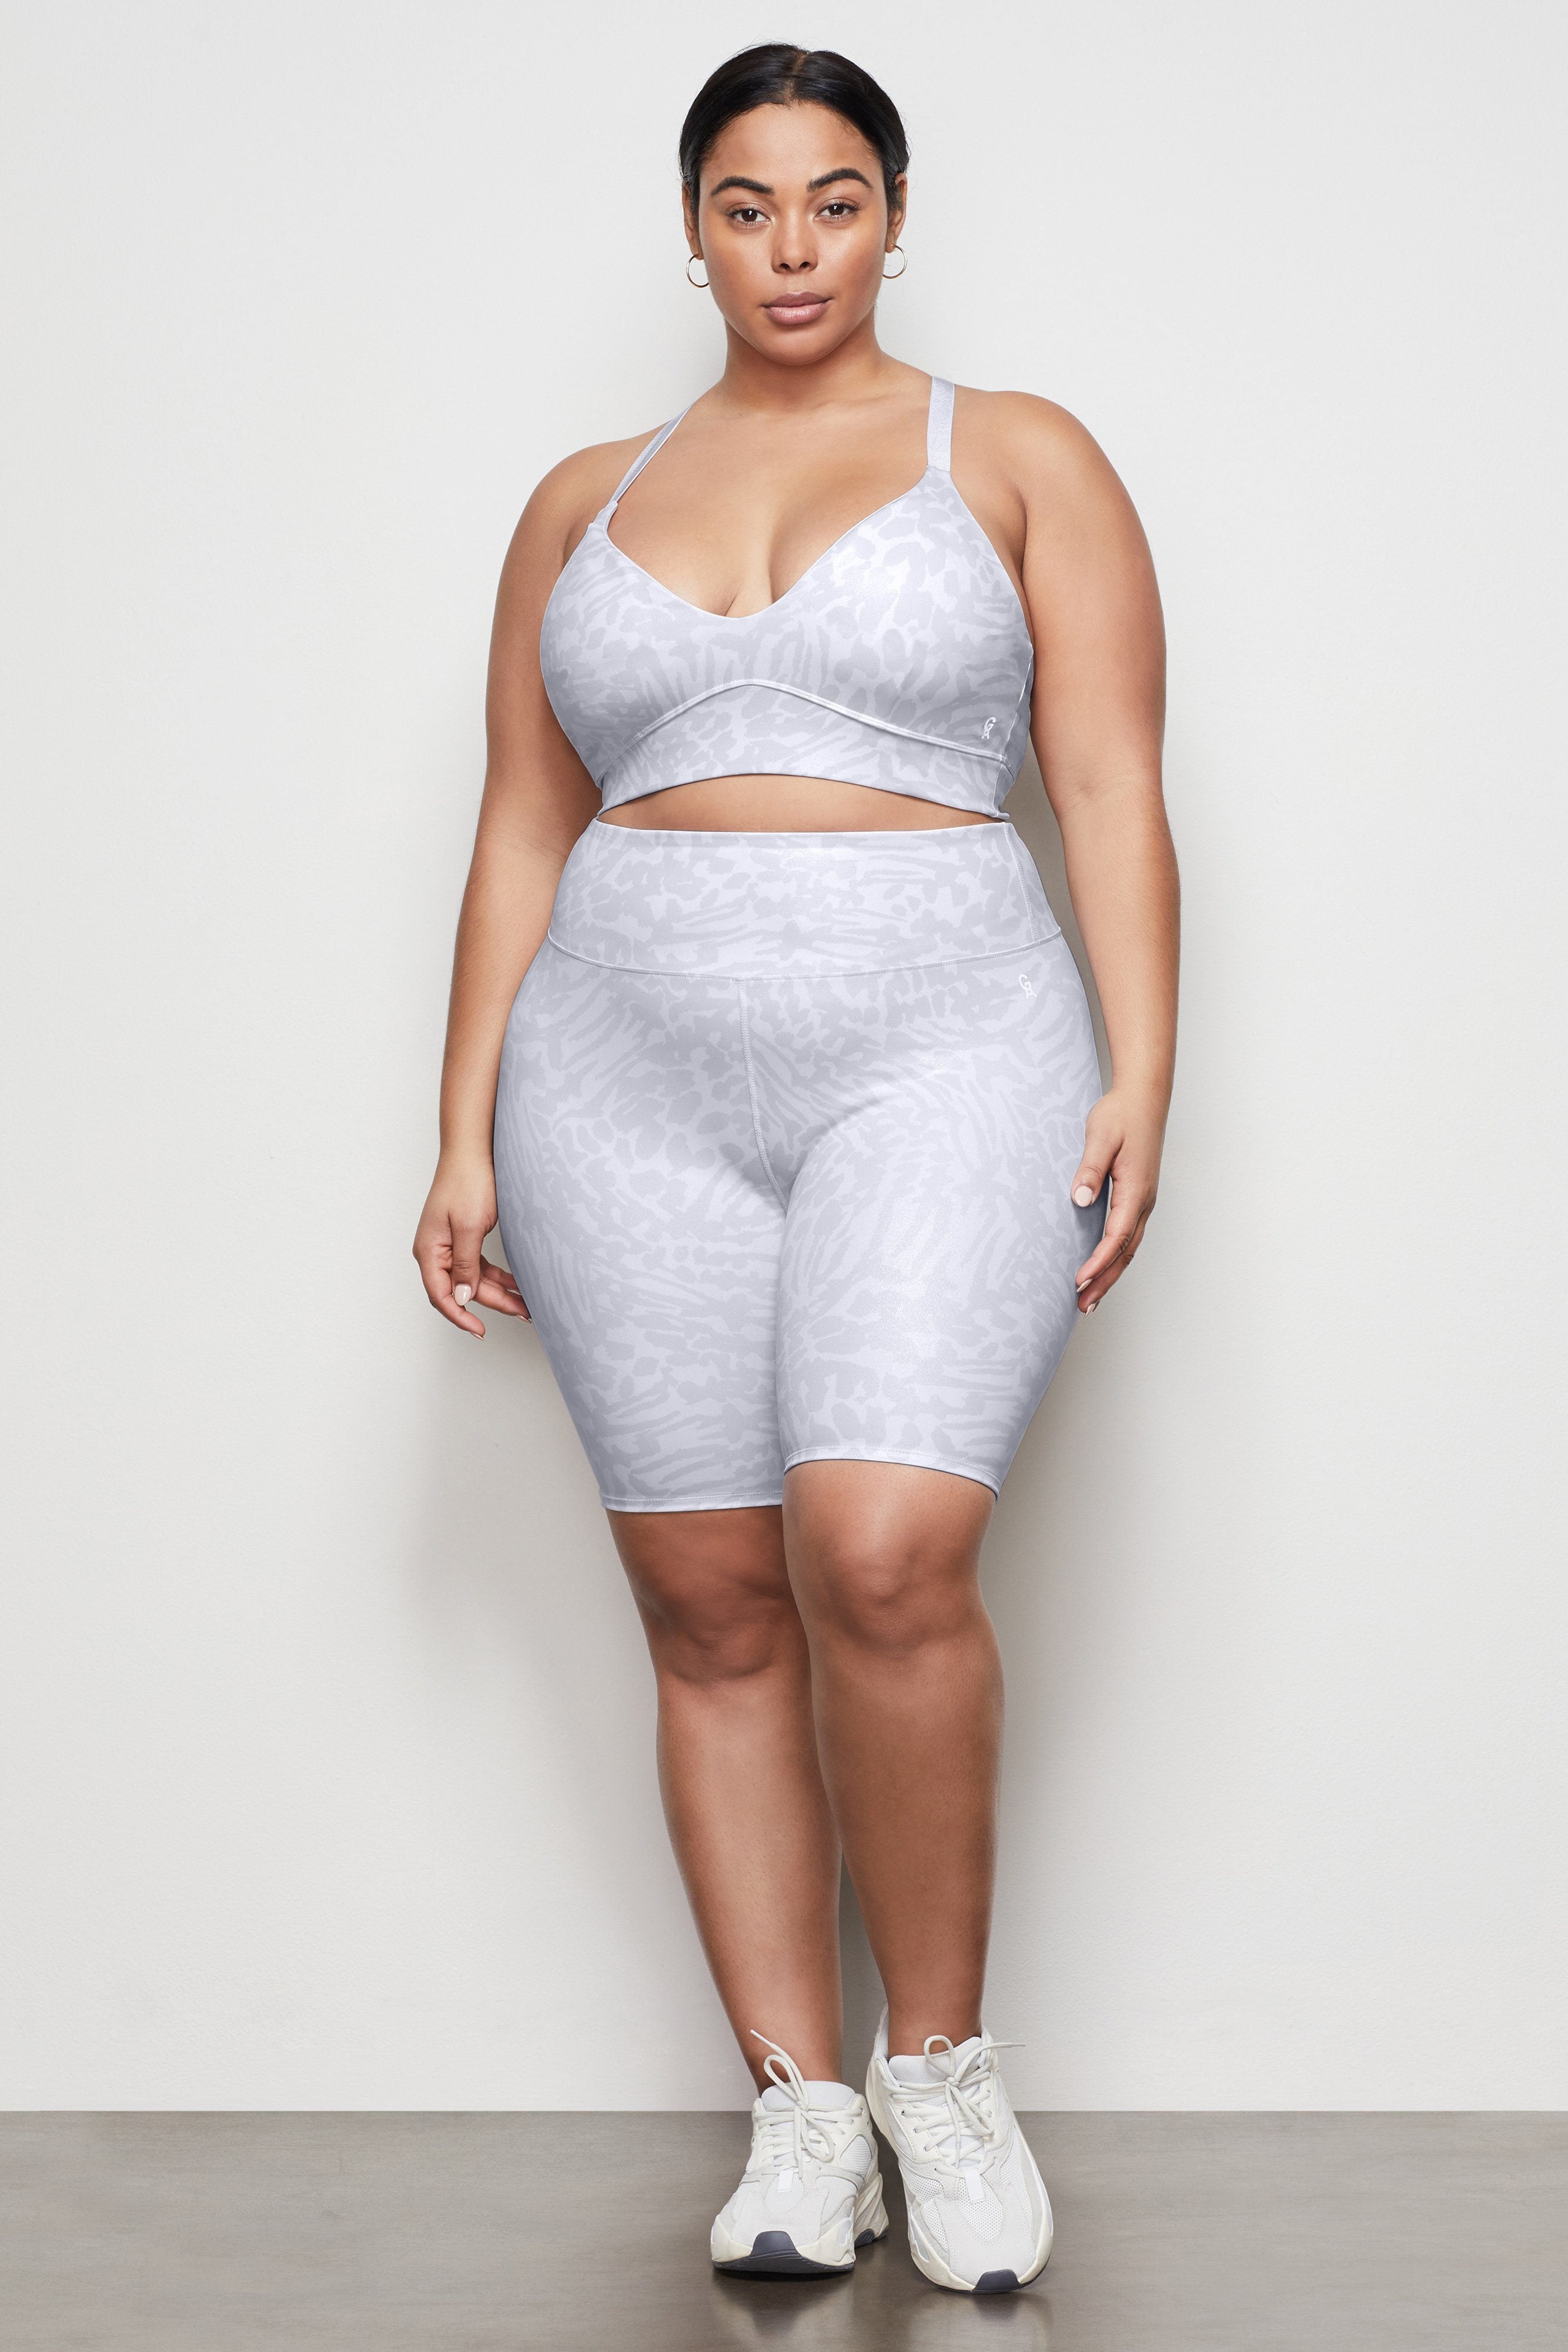 Curvy Girl Workout Gear: Plus Size Running Outfit - The Pretty Plus